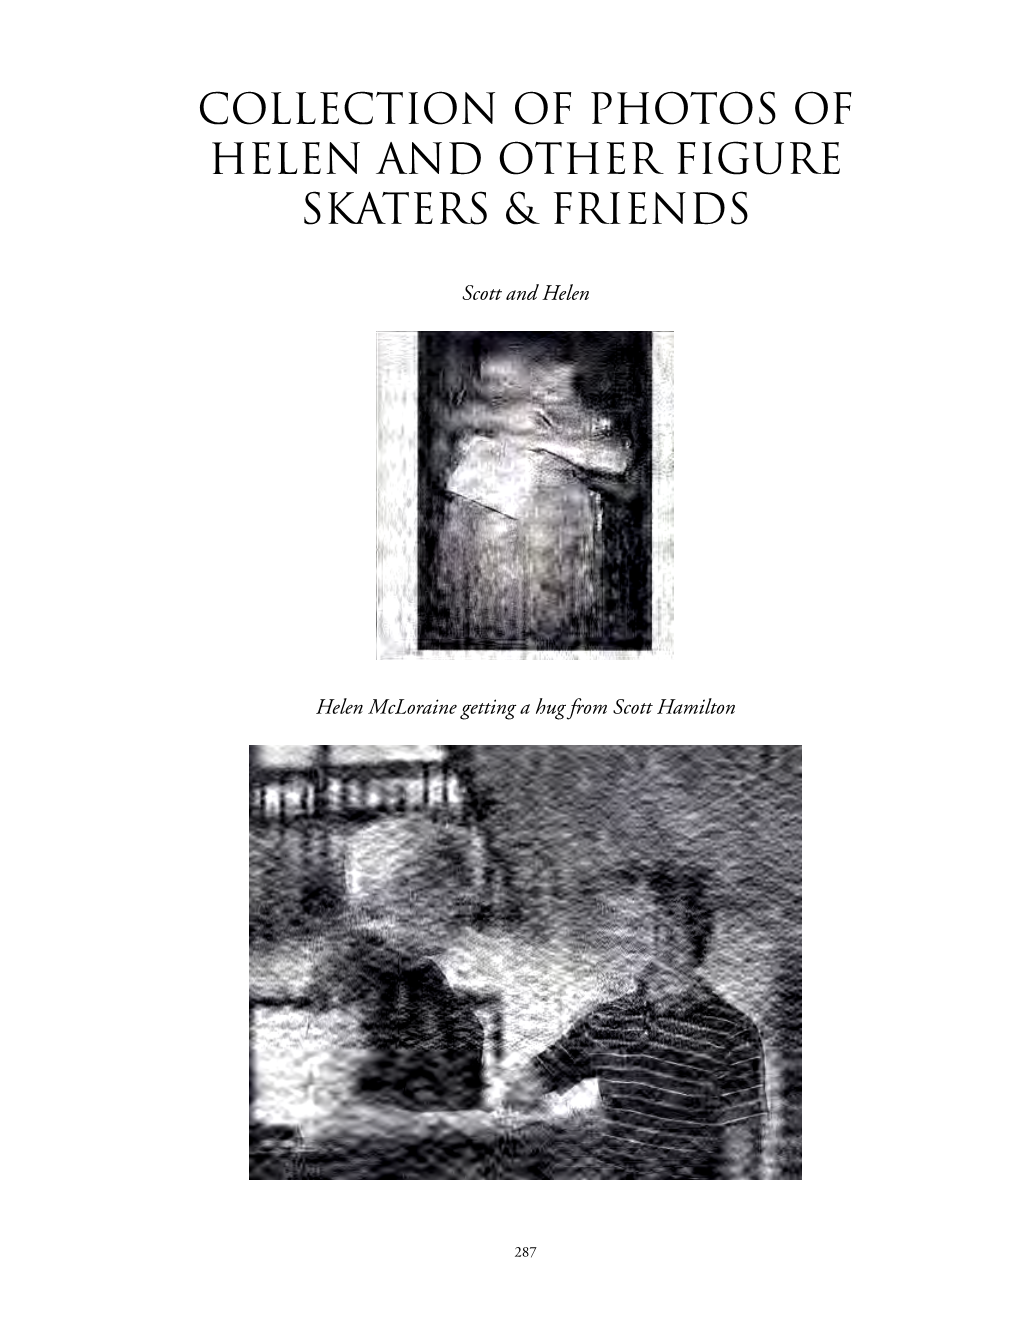 Collection of Photos of Helen and Other Figure Skaters & Friends